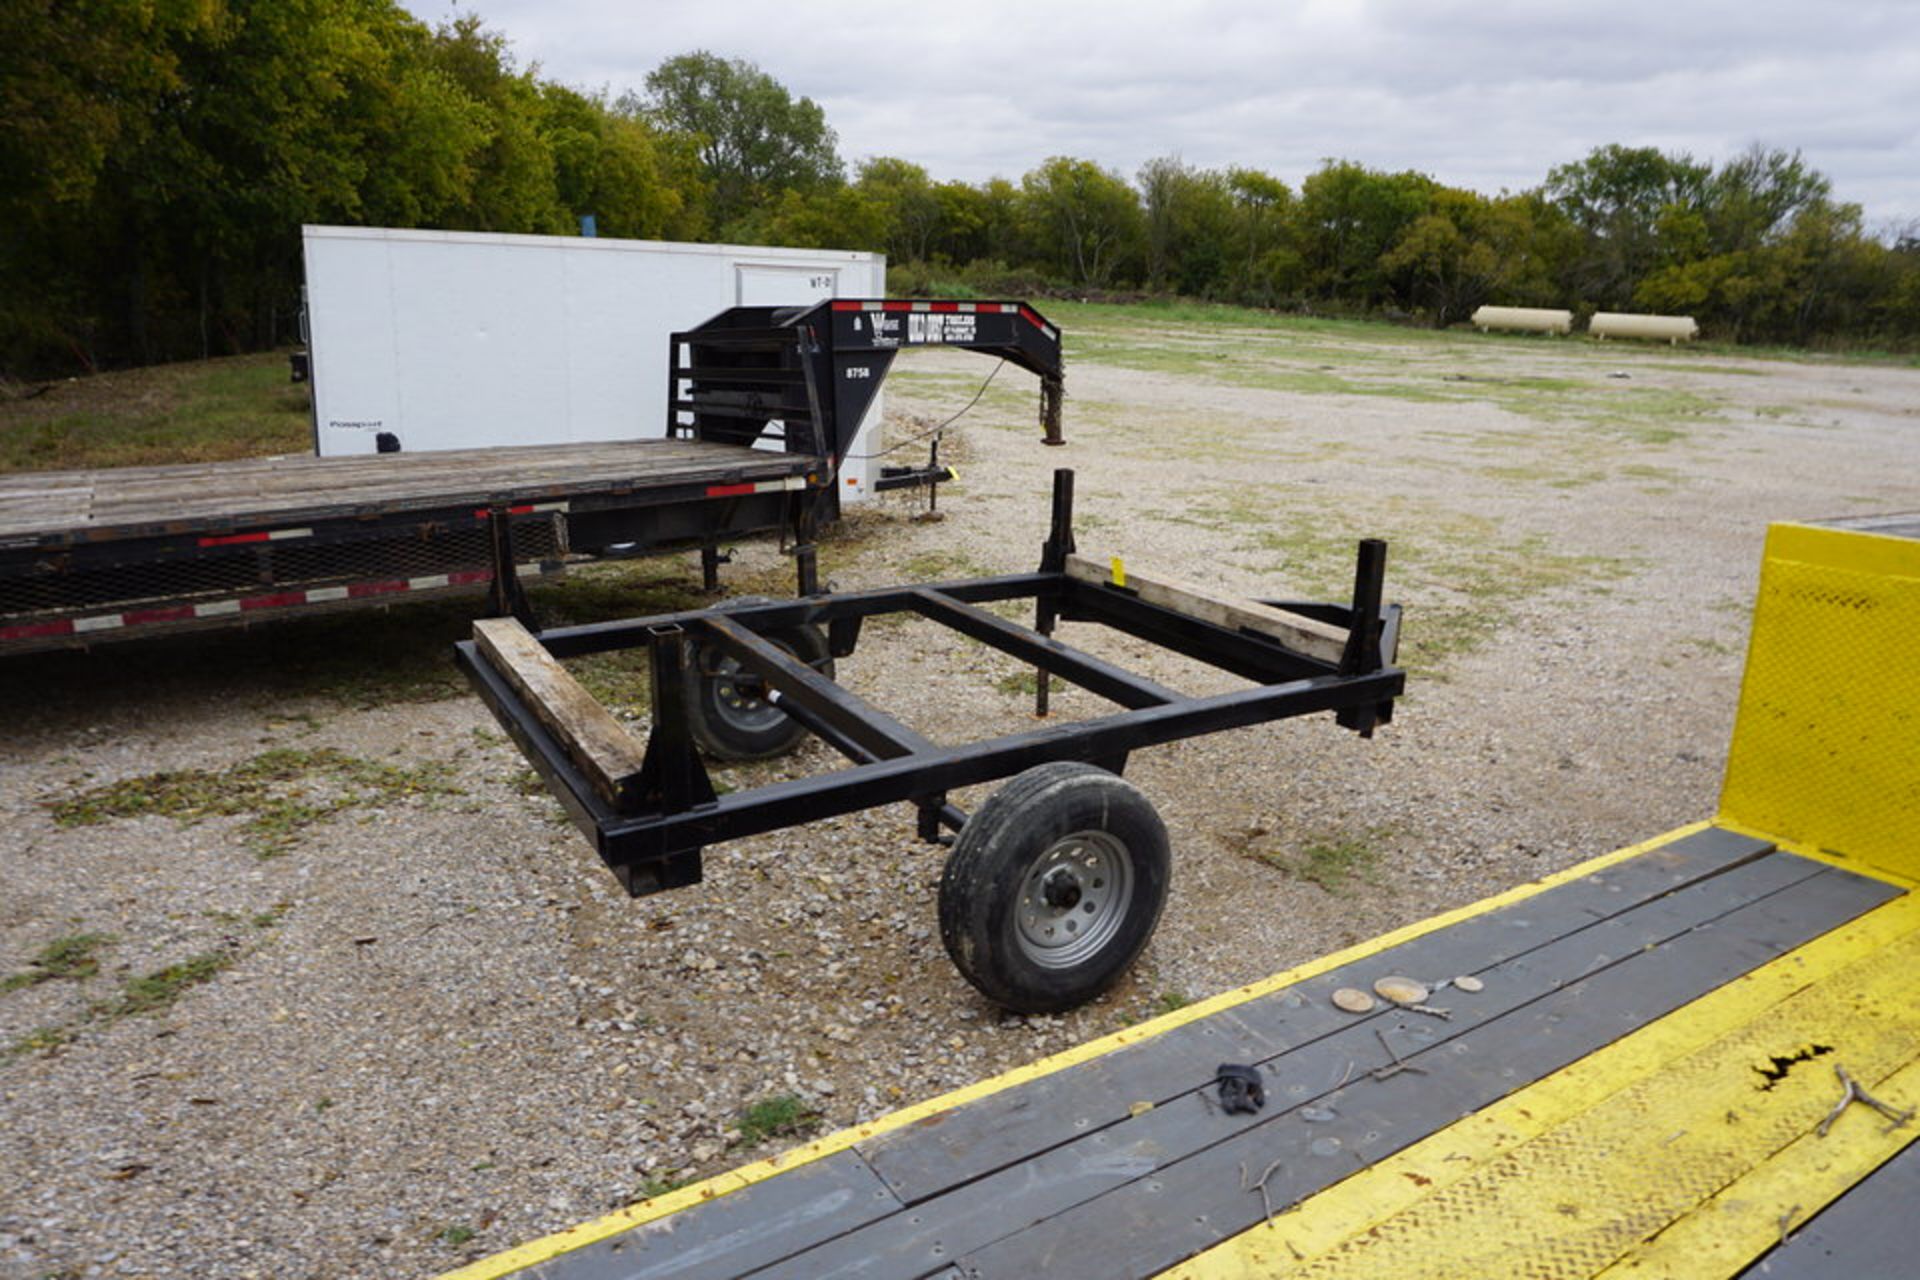 8' x 80" TRAILER FRAME (MUST BE REMOVED BY DECEMBER 22)